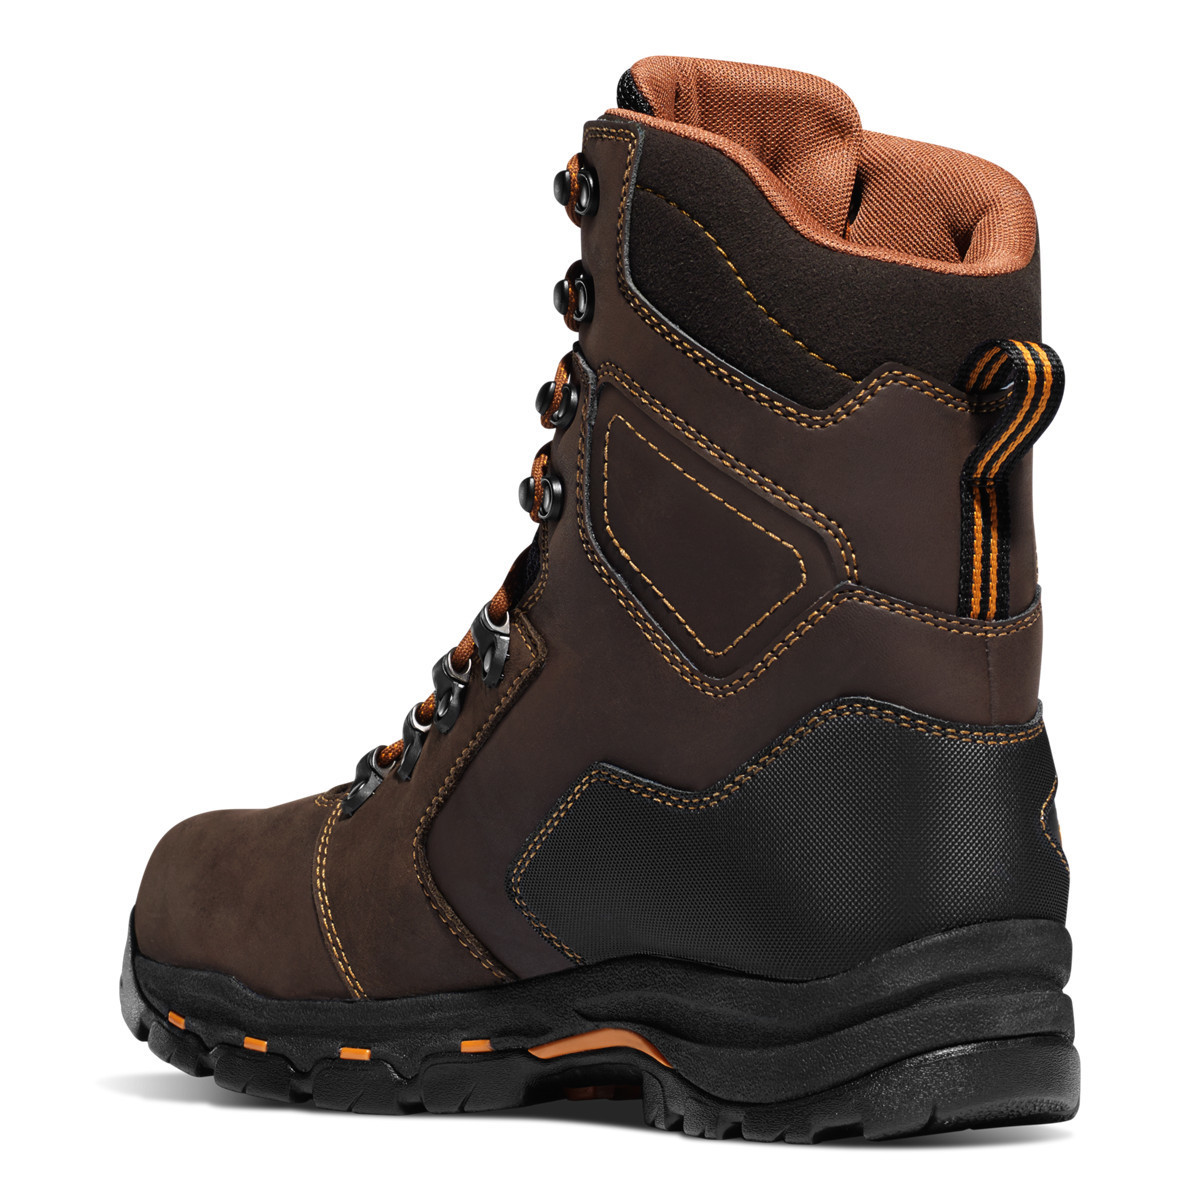 Danner Men's Vicious 8" Brown 400G Insulated NMT Work Boots Brown Chaar